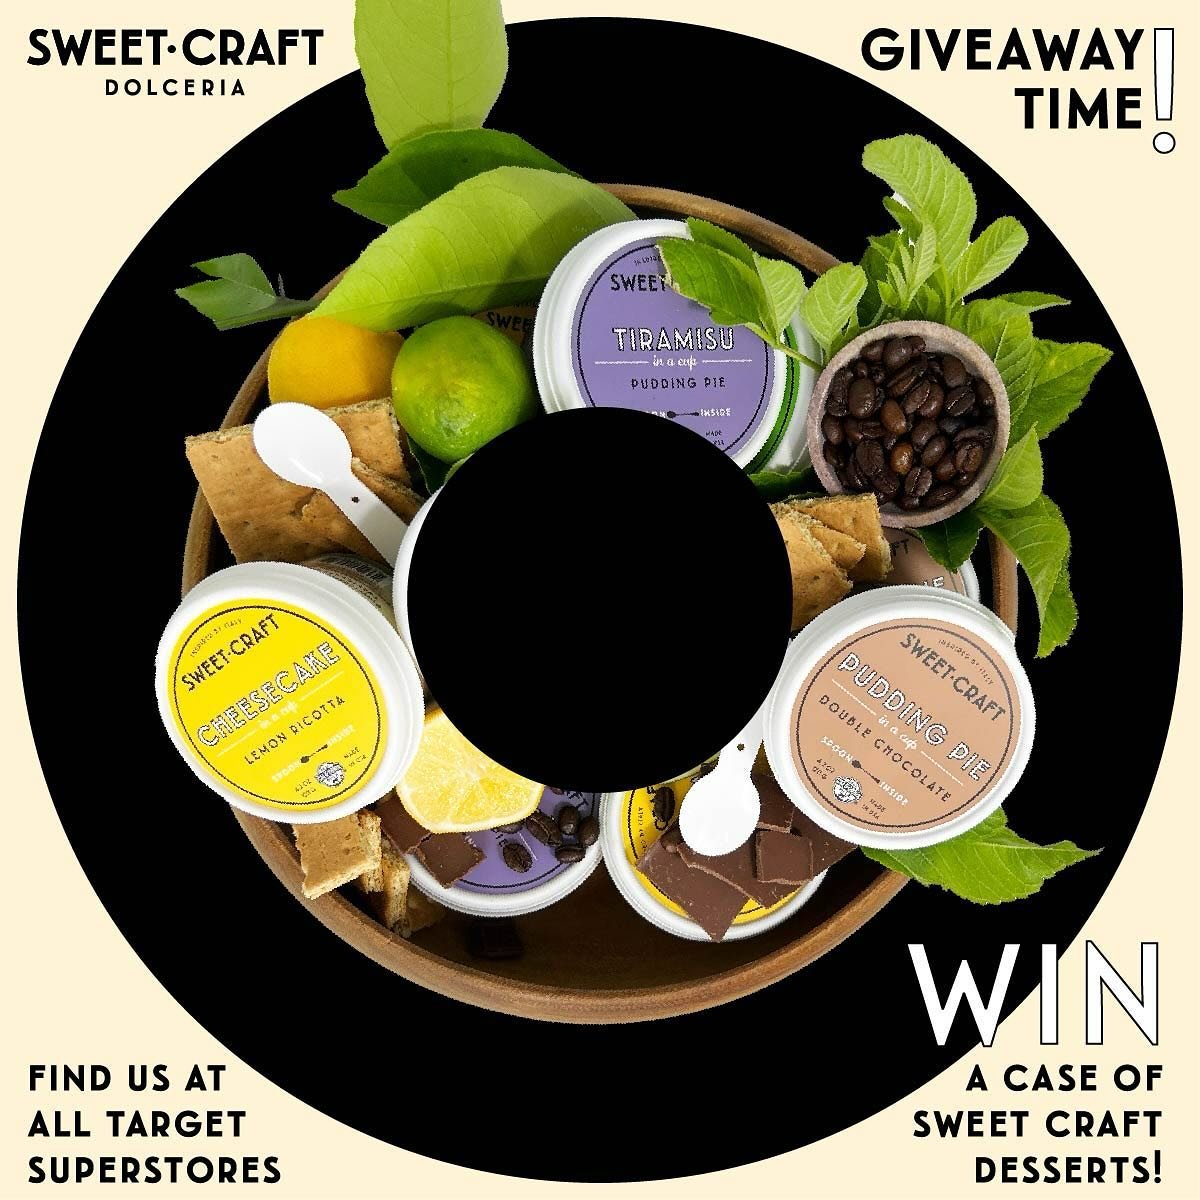 Sweet Craft Giveaway time! To celebrate our new Cups at Target Superstores Nationwide, we&rsquo;re giving away a case of them! We&rsquo;re thrilled to launch our new desserts and we&rsquo;d love to know what you think &mdash; so share your thoughts f